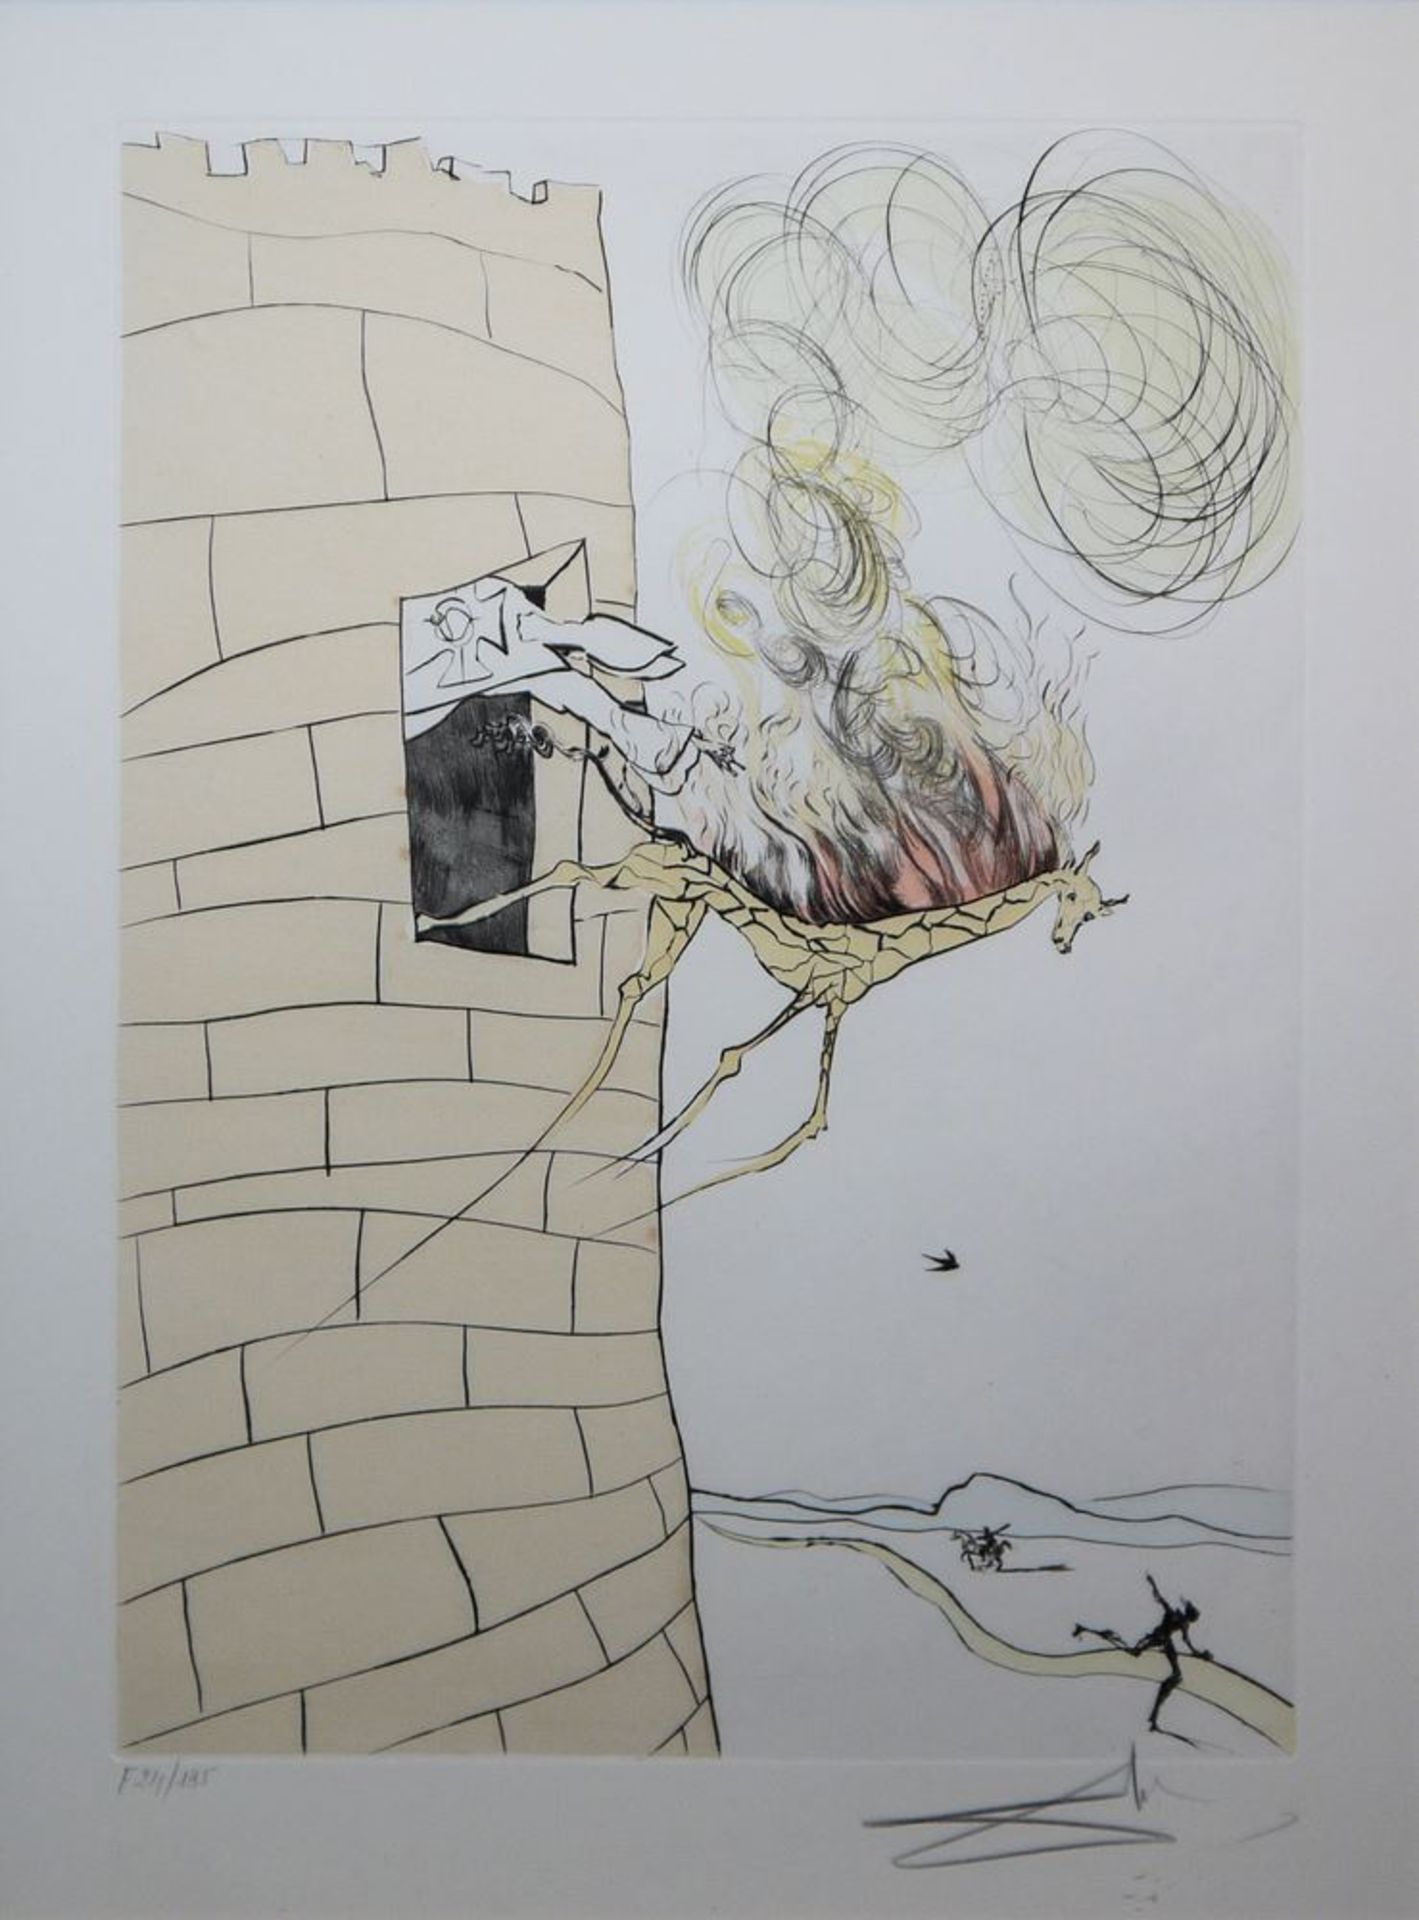 Salvador Dalí, "The Great Inquisitor Expels the Savior", signed drypoint with pochoir from 1974 - Image 3 of 3